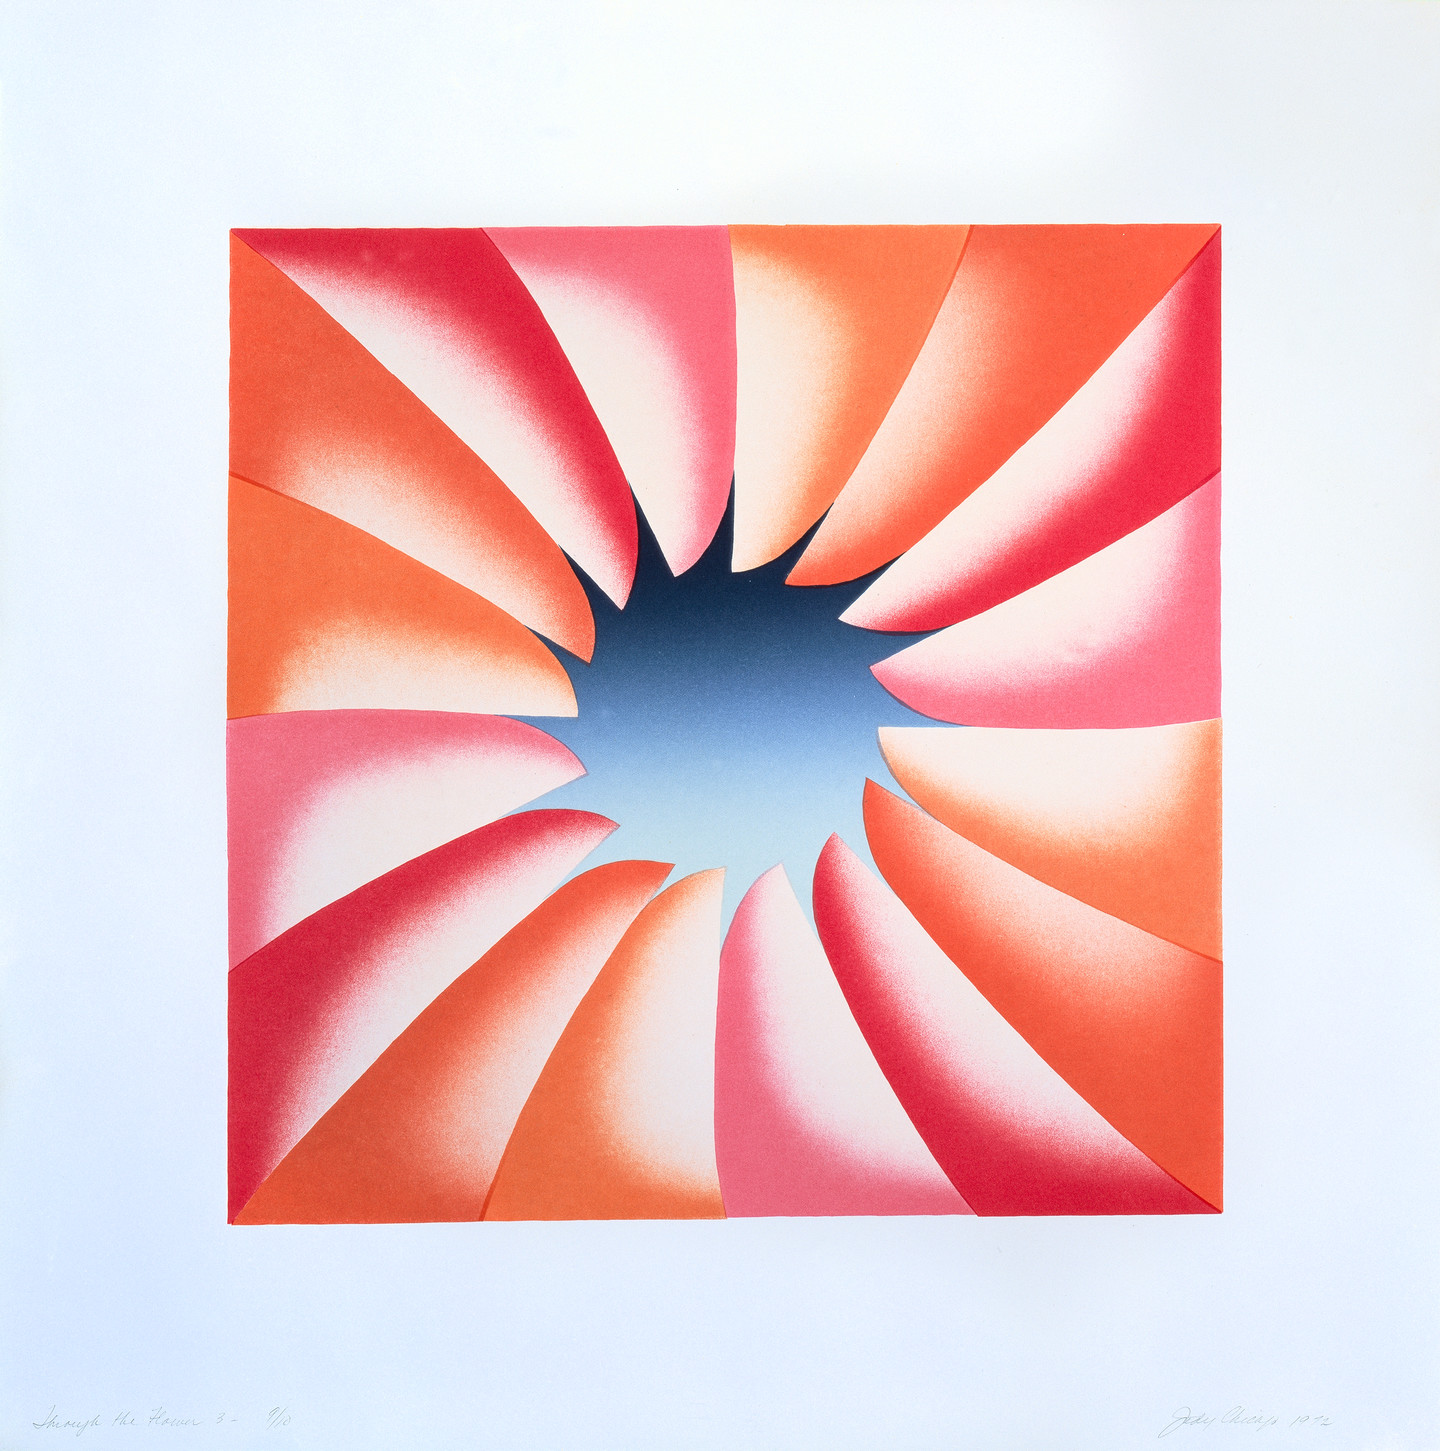 A square-shaped abstract image shows a portal with dark-blue tone fading to light, surrounded by elements that come together in a fan. The fan blades are rendered in smoothly shaded pink and orange tones.